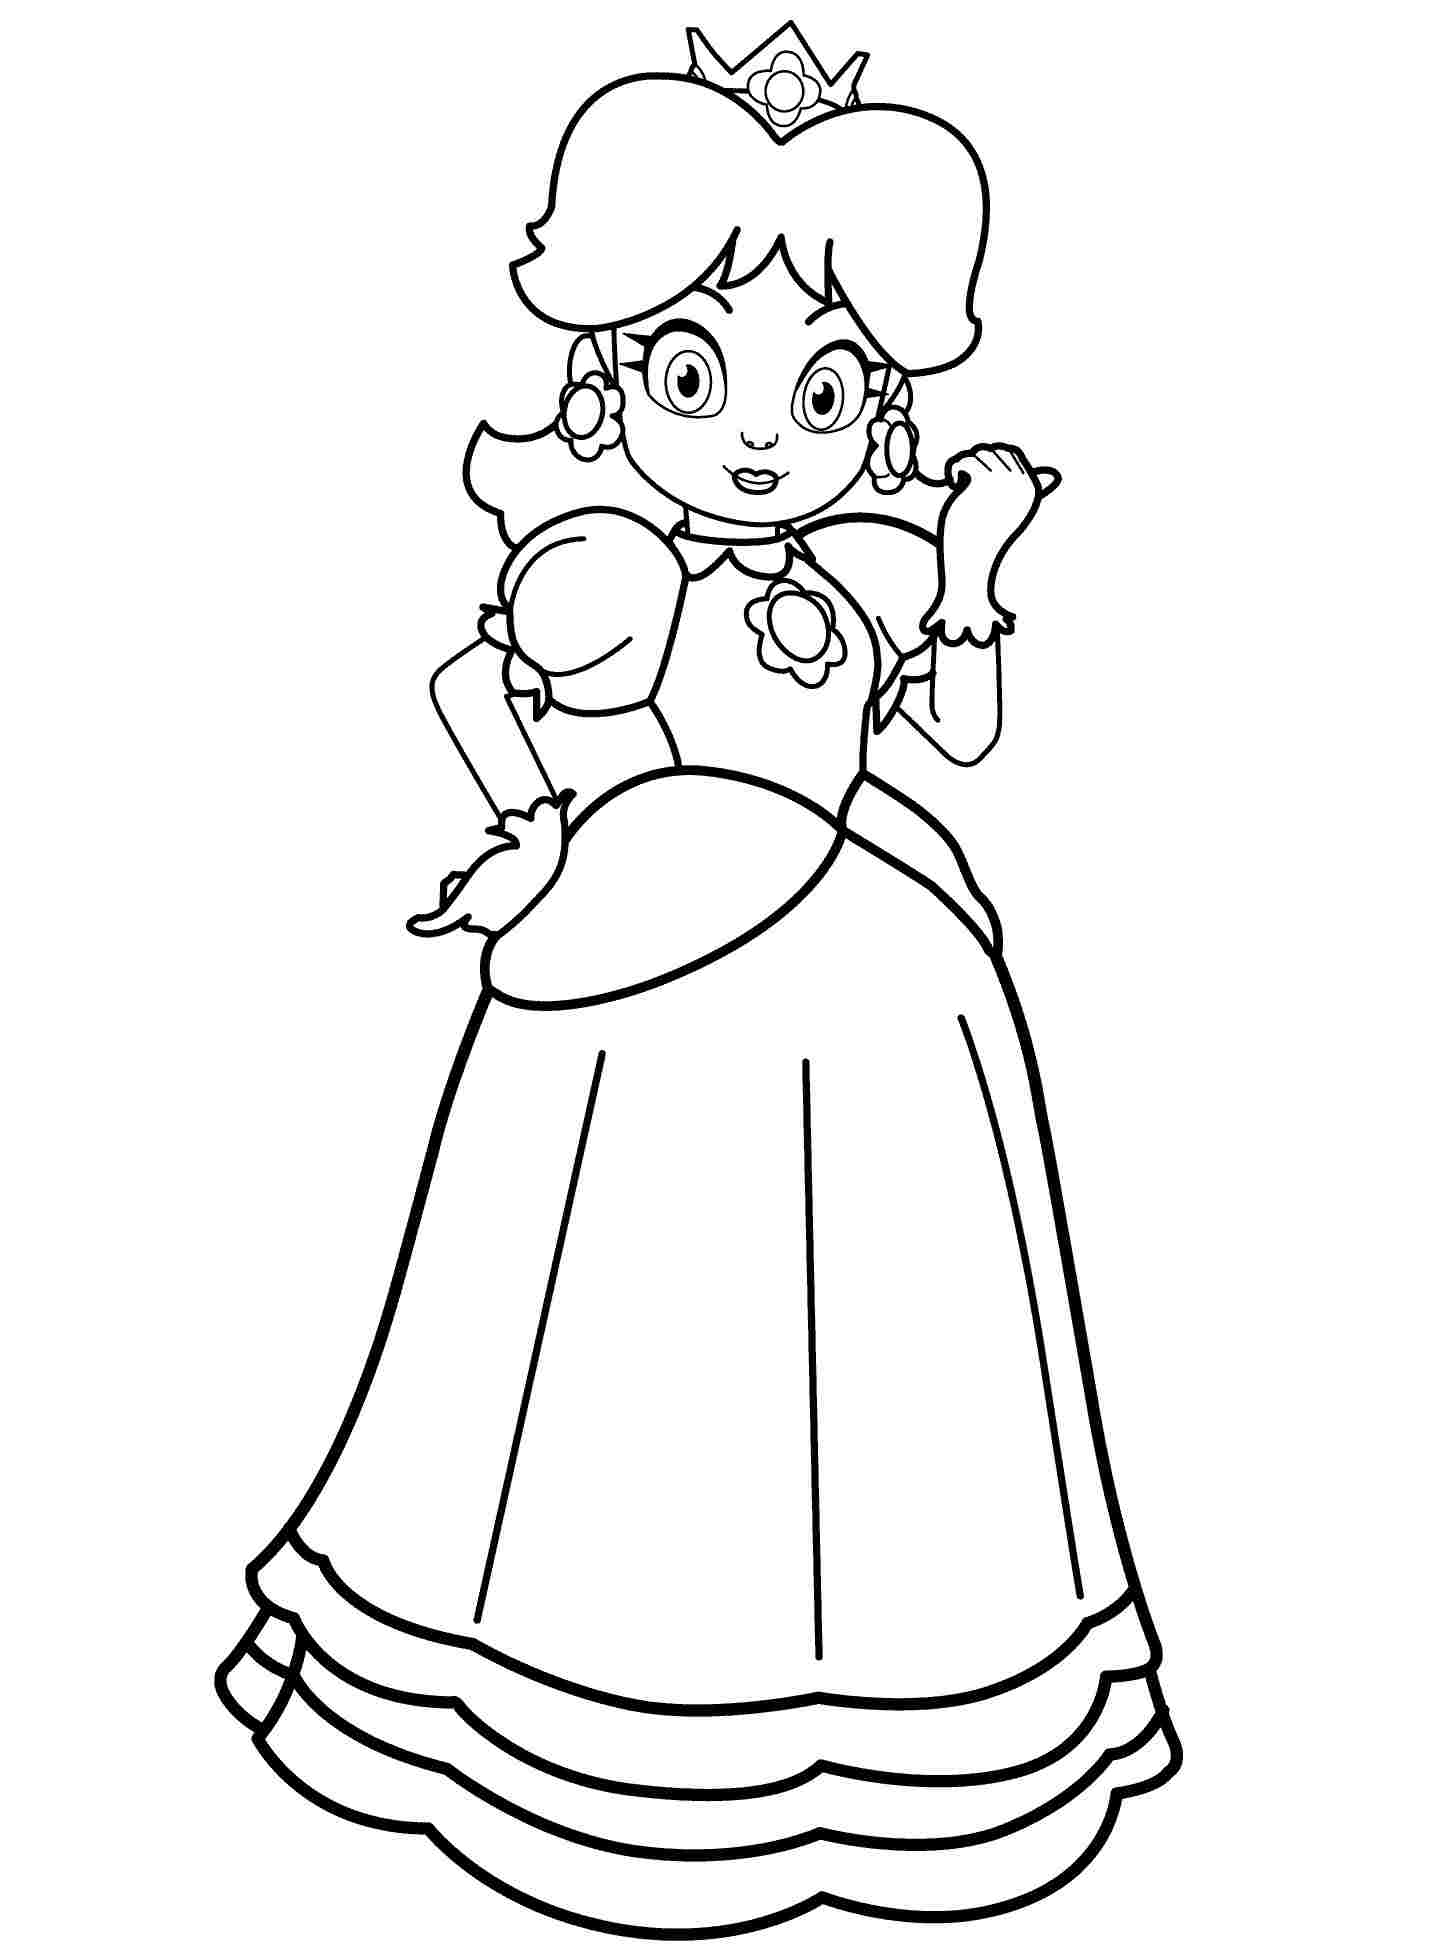 Princess Daisy is pointing something Coloring Page